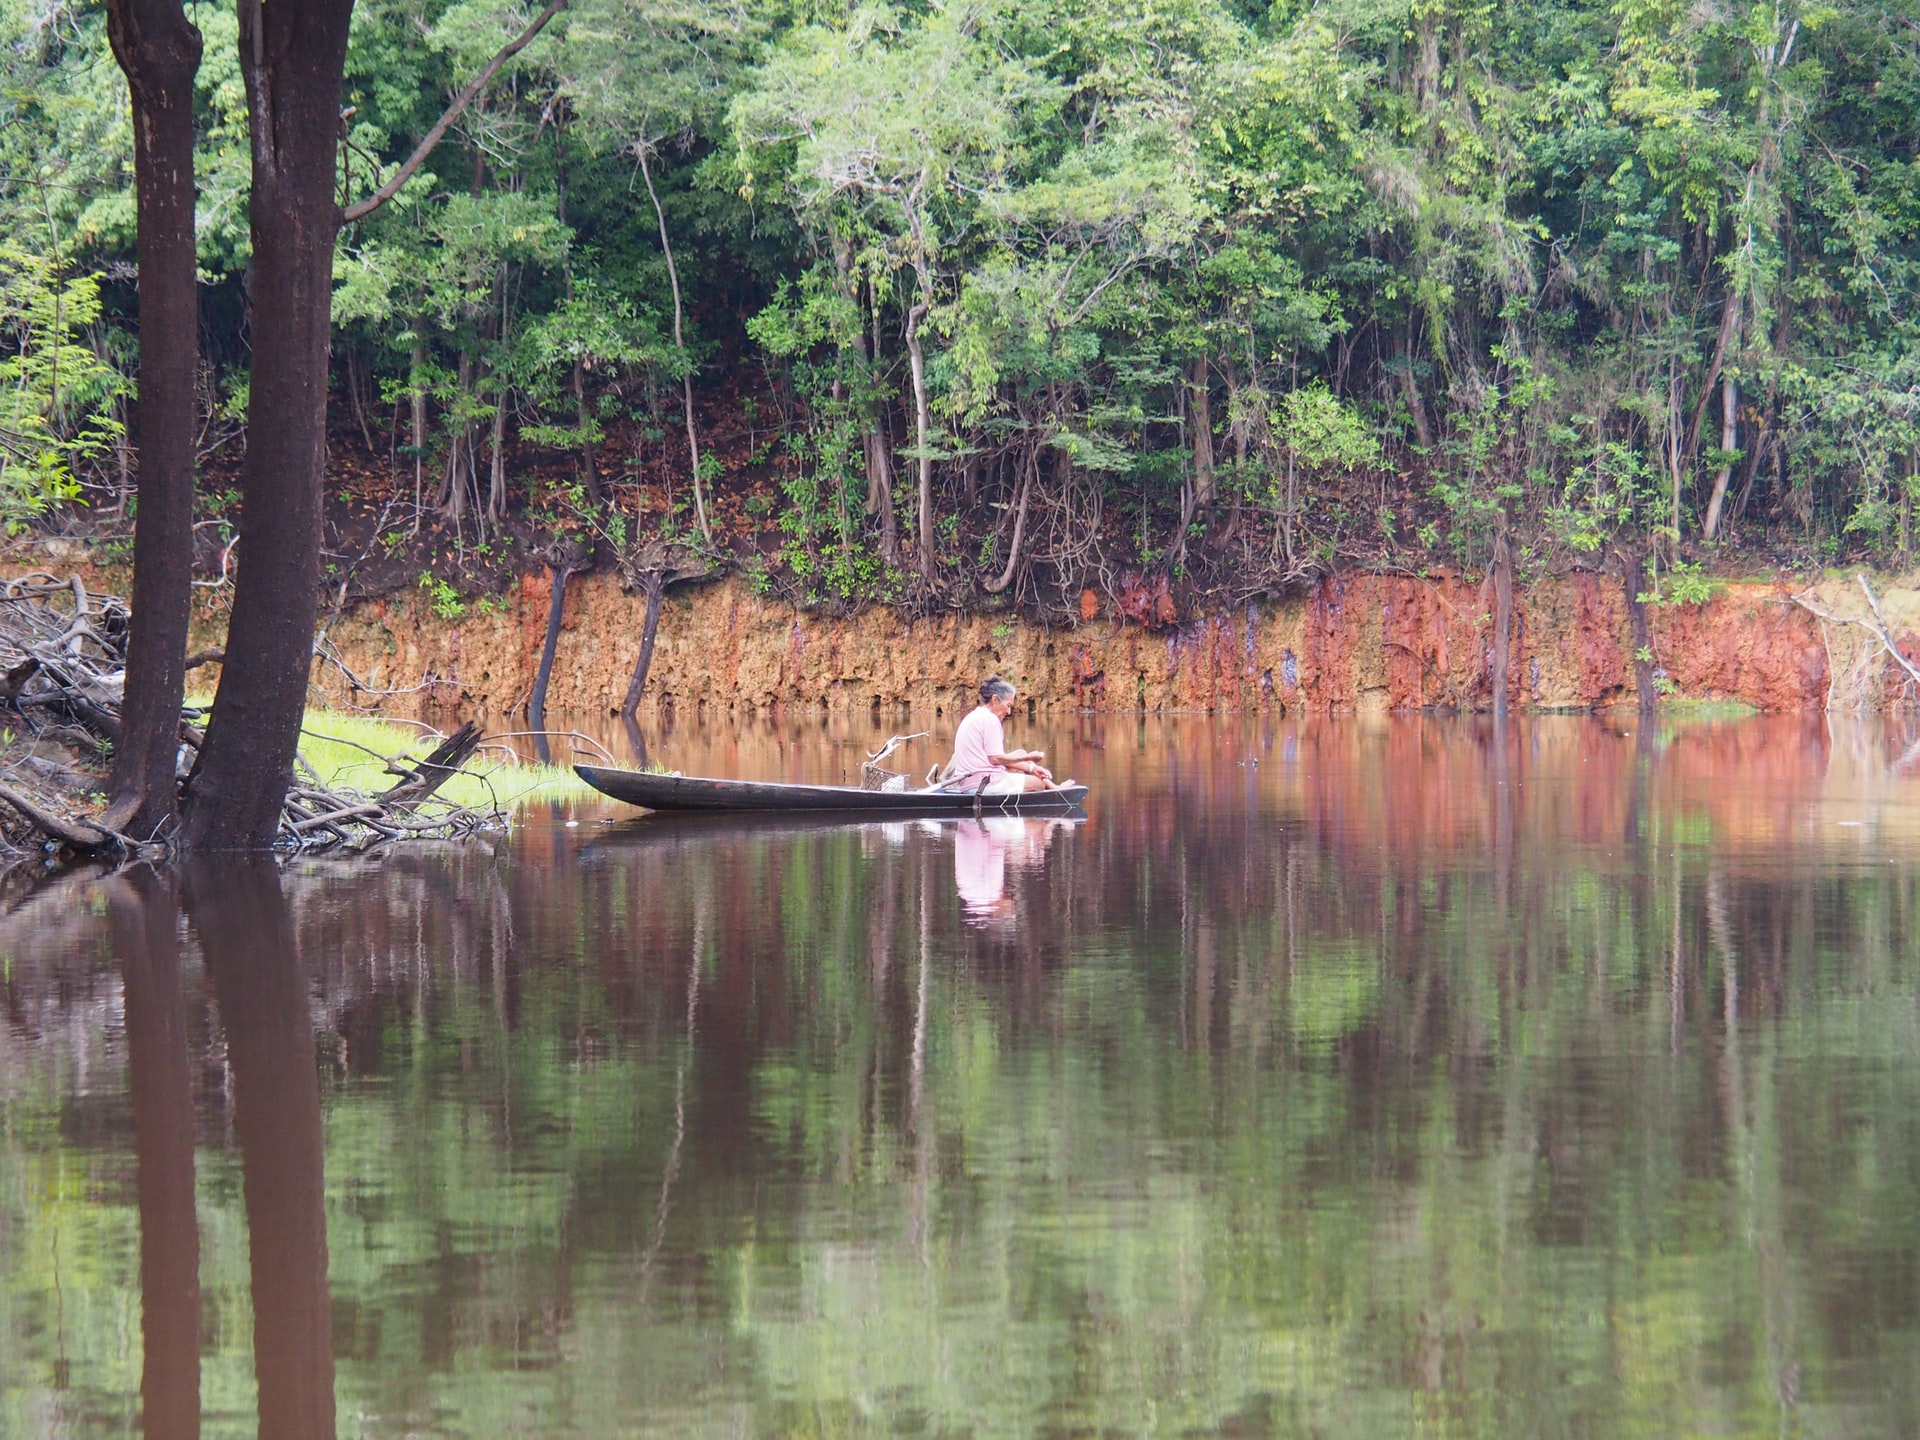 Woman on the Amazon in Brazil